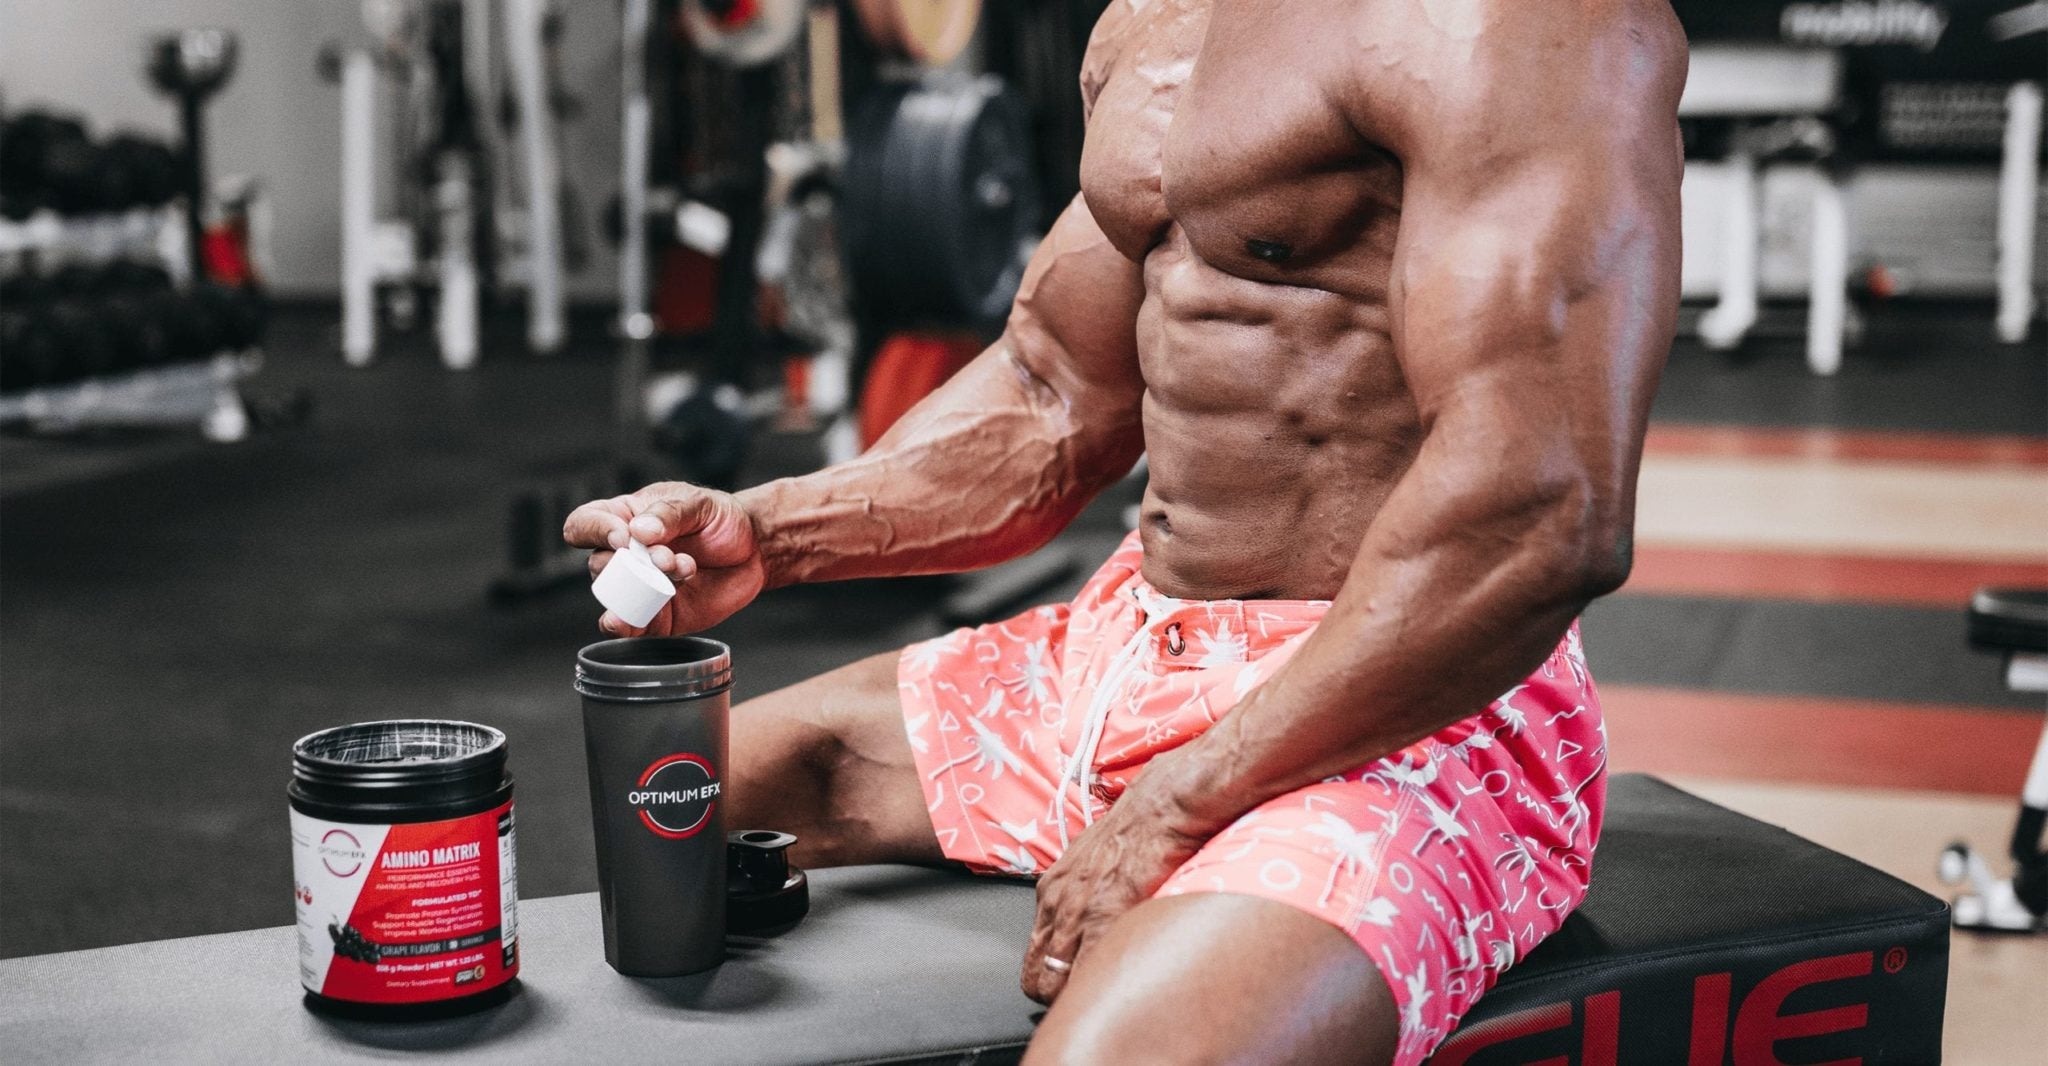 8 Questions To Ask Before You Buy Amino Acids